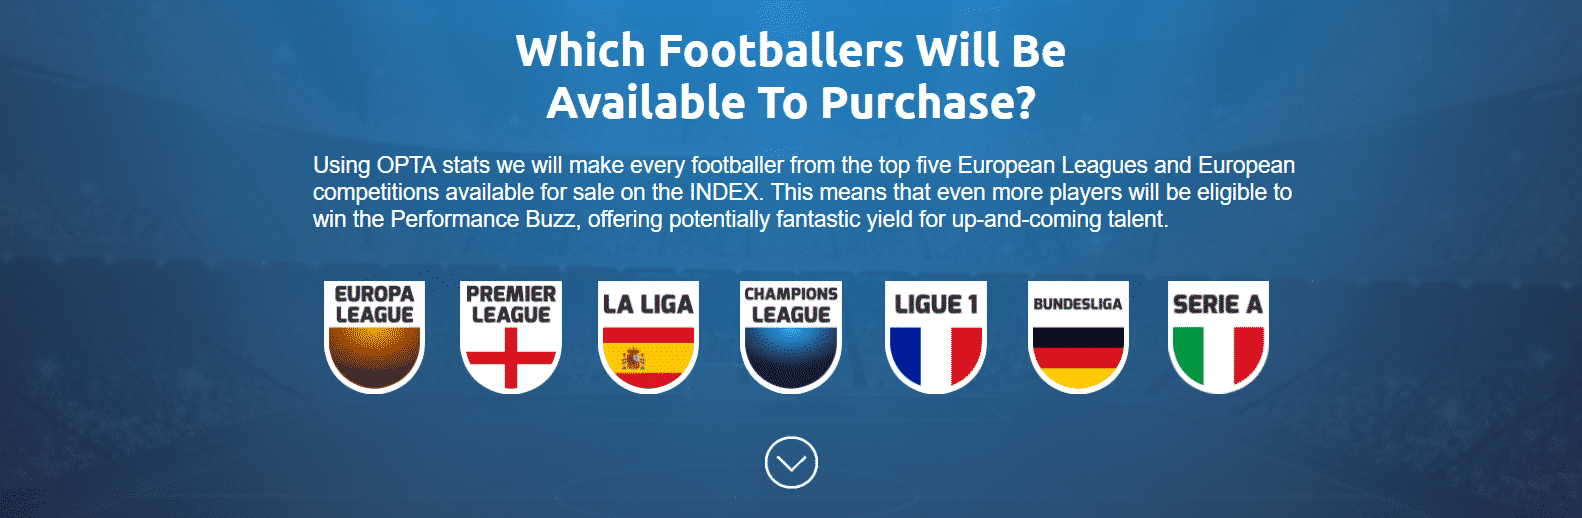 Football Index - Which Footballers Will Be Available To Purchase?